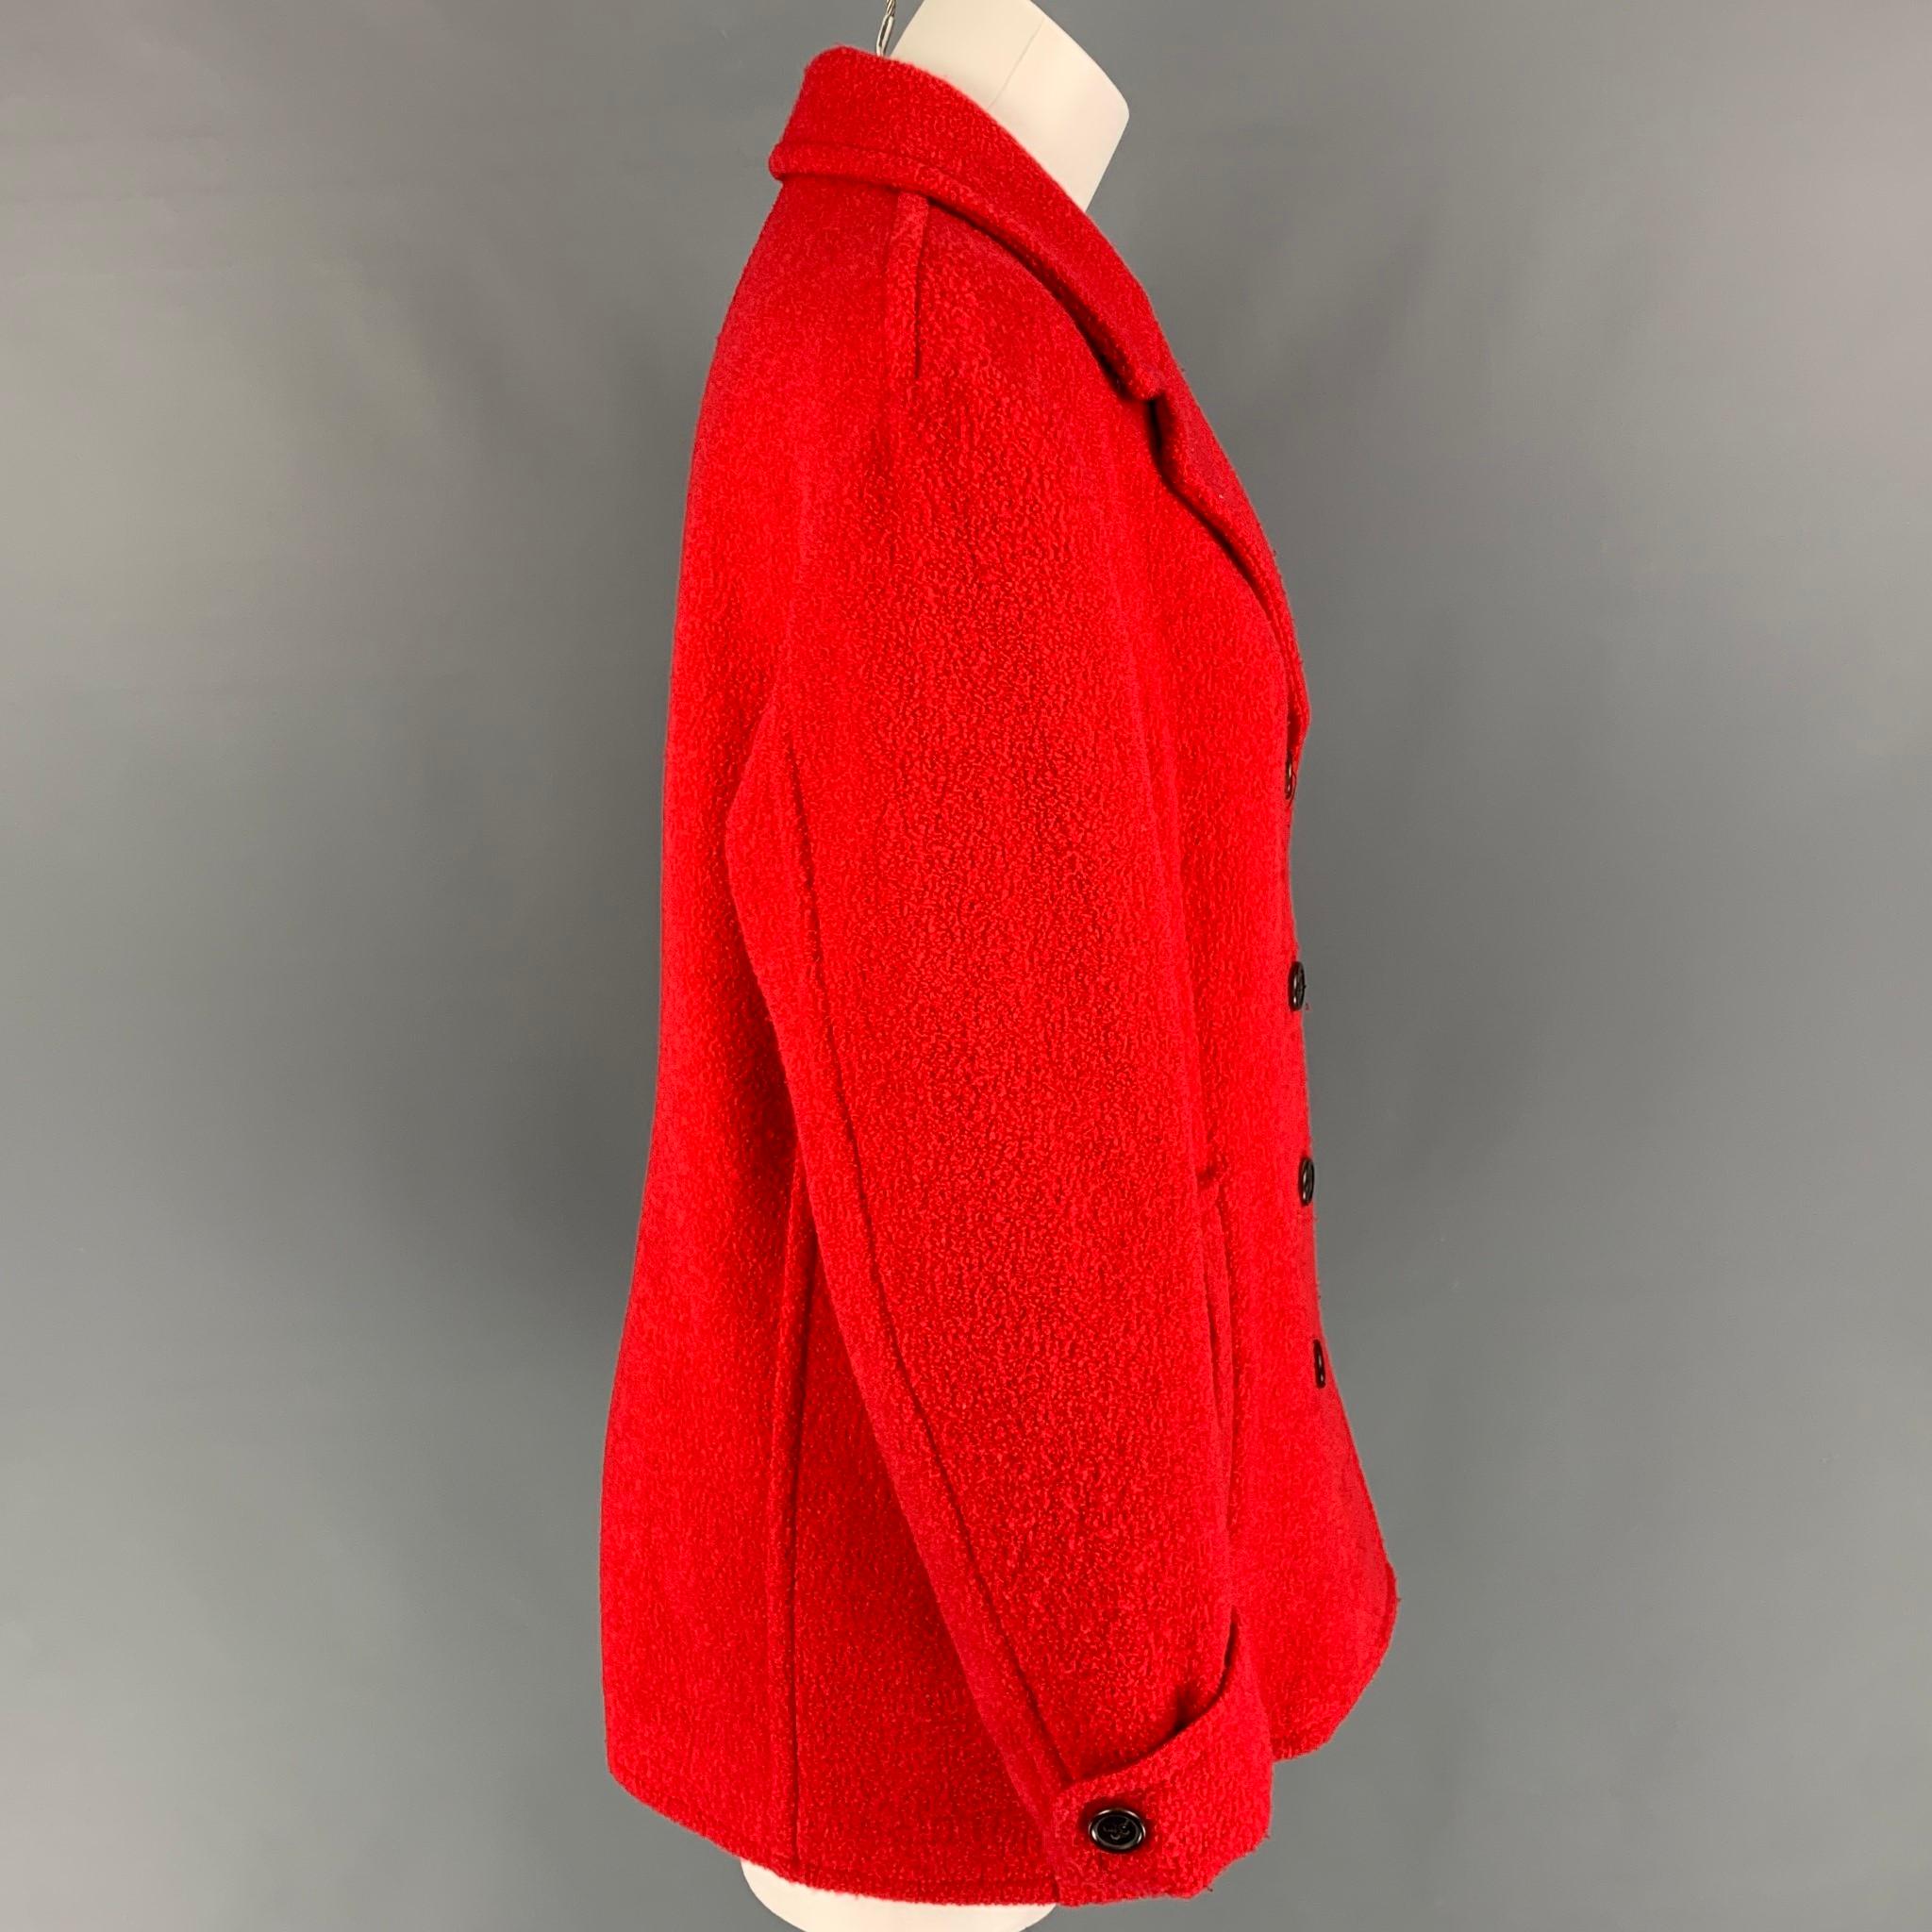 BALLY peacoat comes in a red textured wool blend with a full liner featuring a notch lapel, slit pockets, and a double breasted closure. Made in Italy. 

Very Good Pre-Owned Condition.
Marked: 46

Measurements:

Shoulder: 16.5 in.
Bust: 40